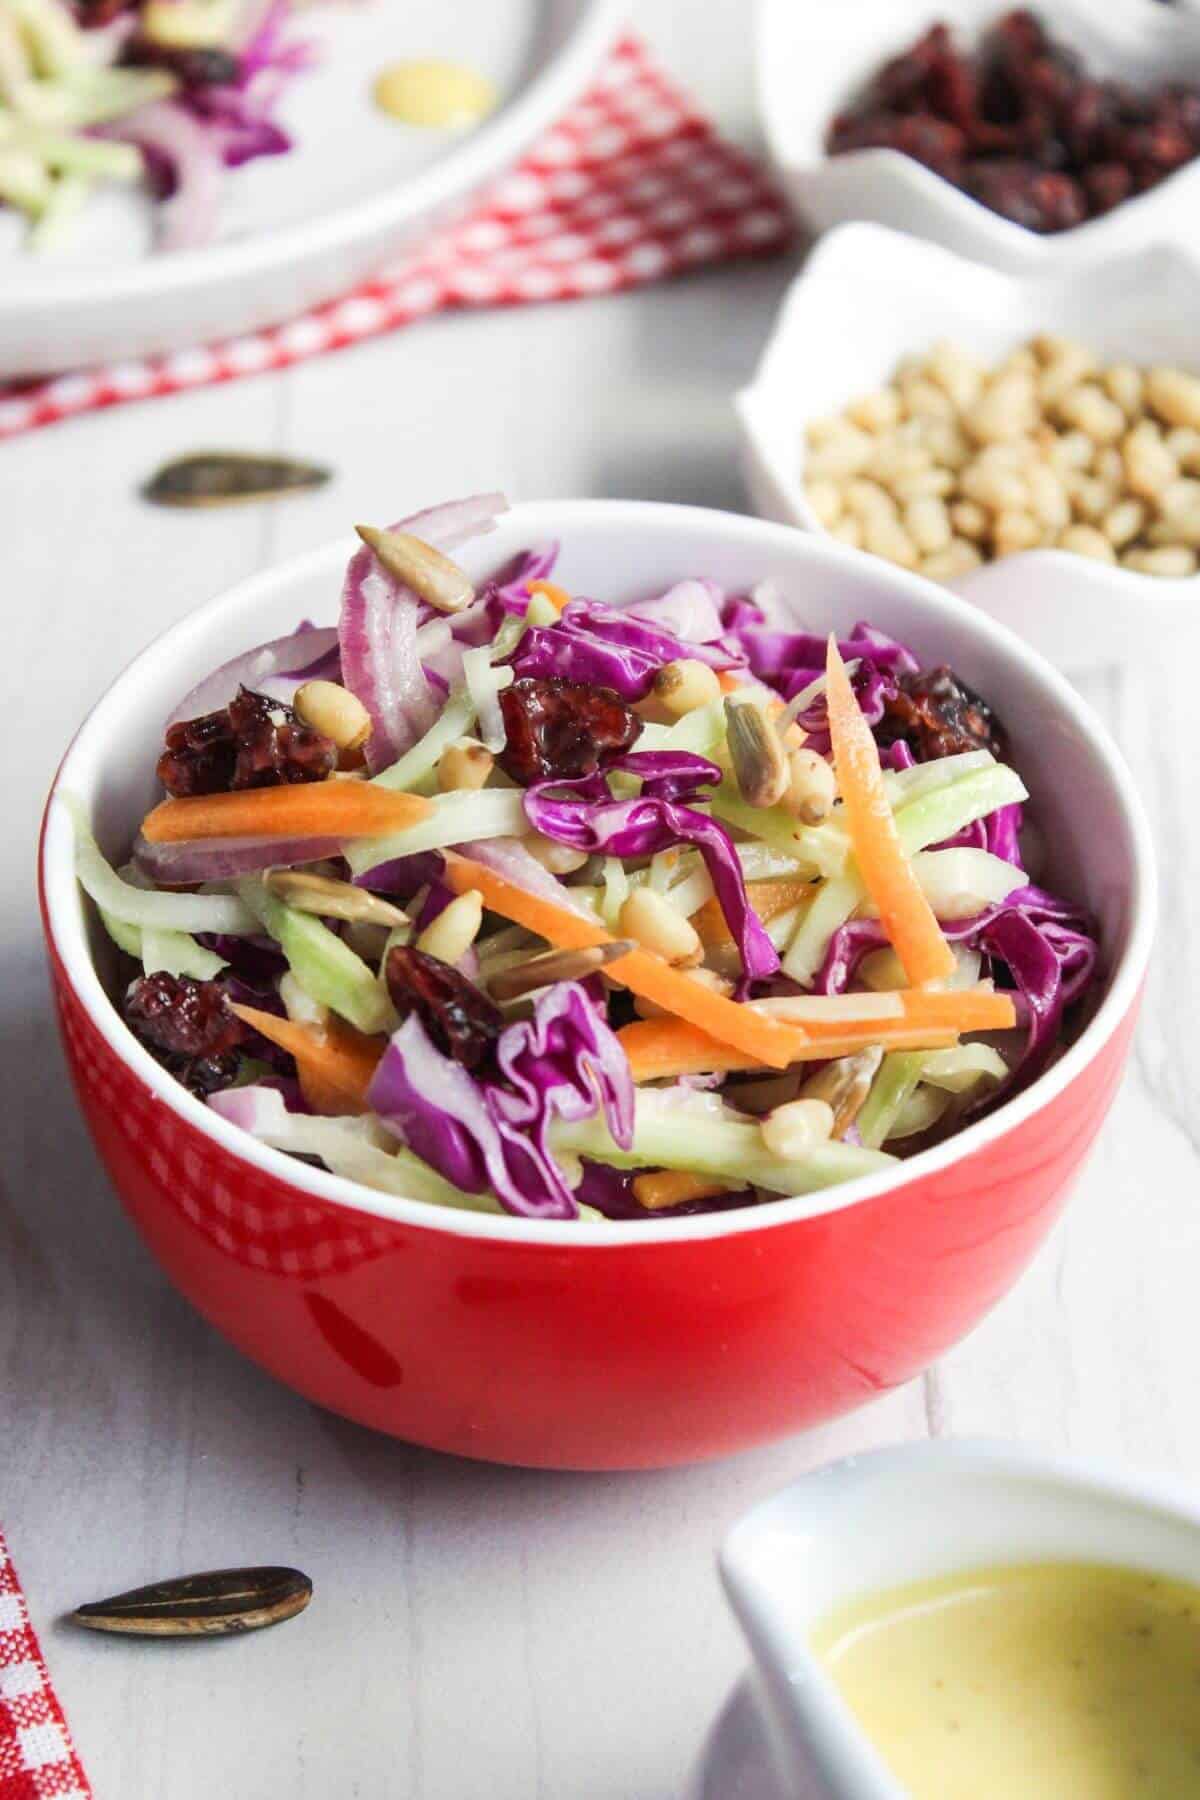 Broccoli slaw salad in small red bowl.